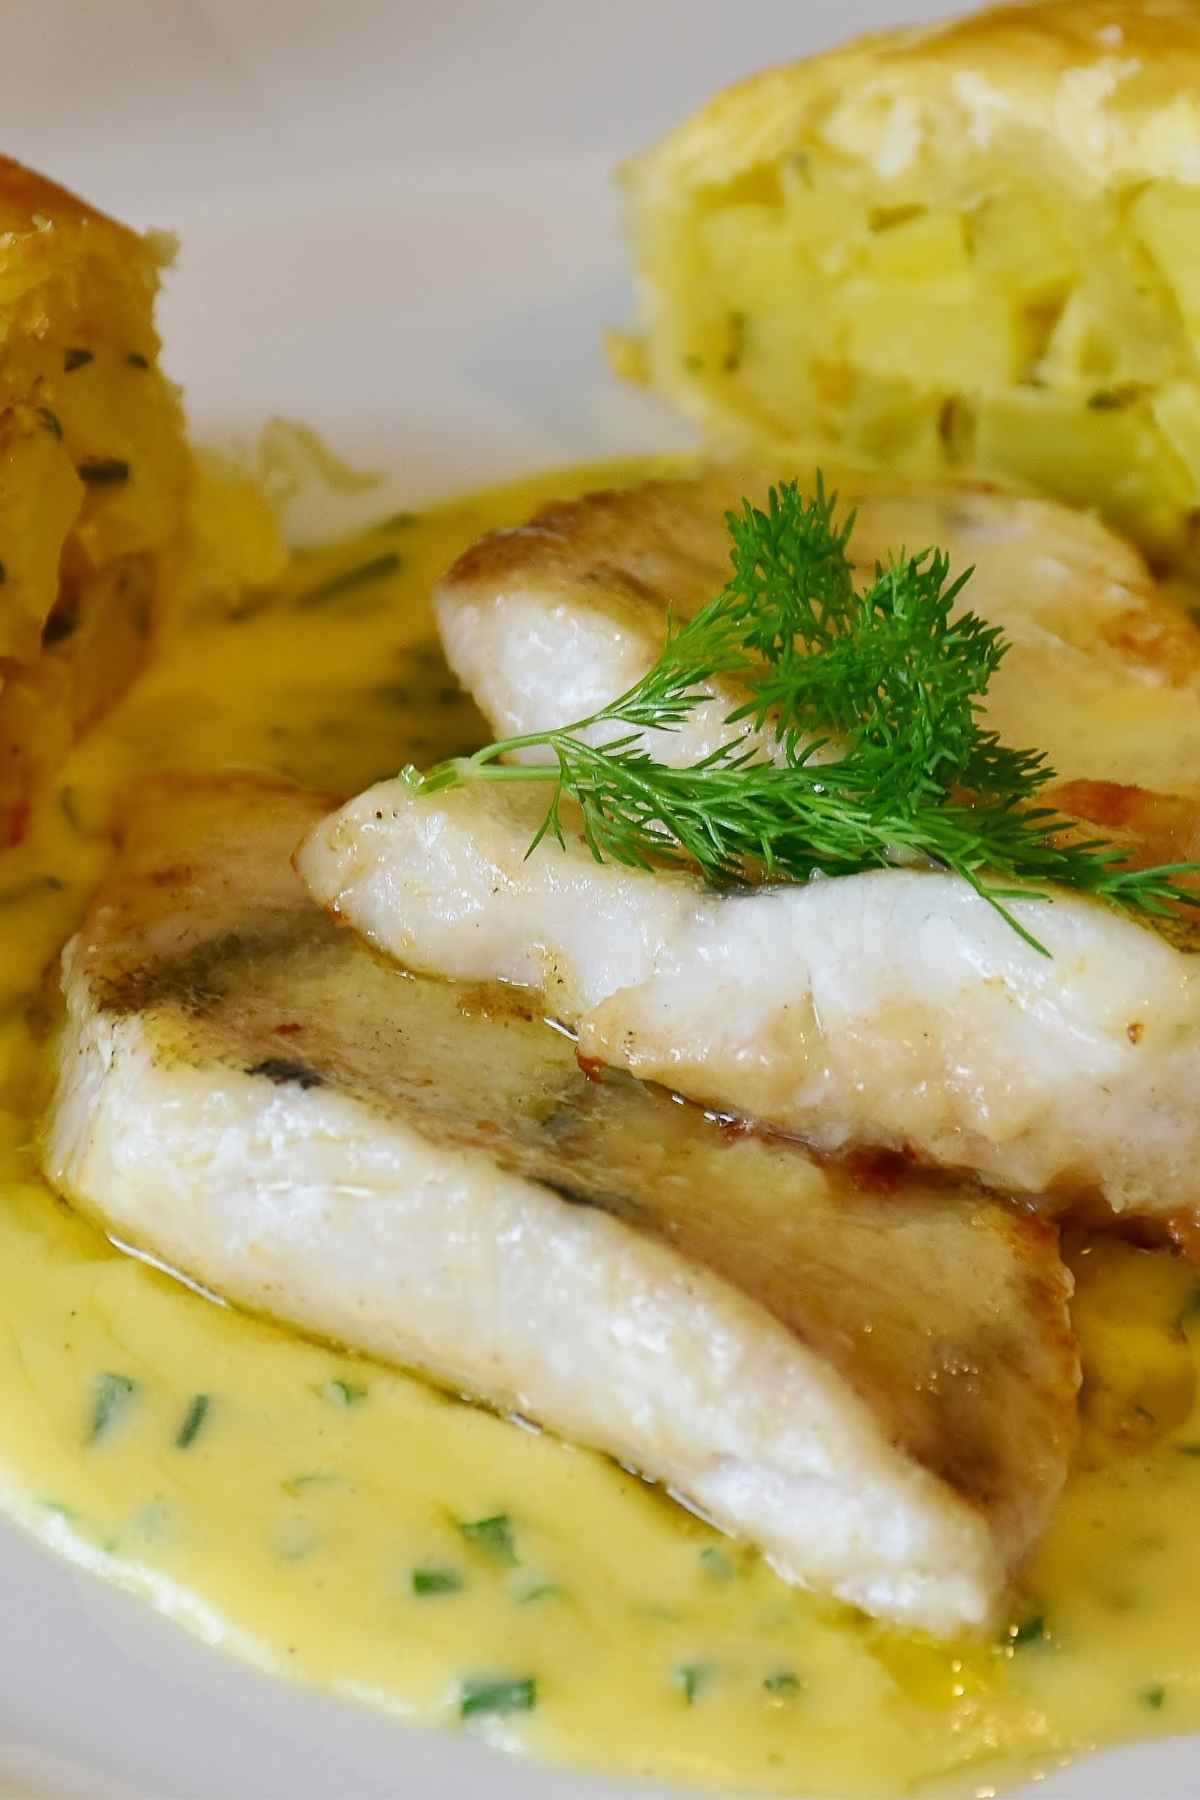 This Hollandaise Fish is creamy, healthy, and delicious. It’s a great option when you need to get the dinner on the table in a hurry. Flakey white fish is baked to perfection and served with a tasty hollandaise sauce. It takes just 20 minutes to make and would be a great addition to a busy weeknight meal.